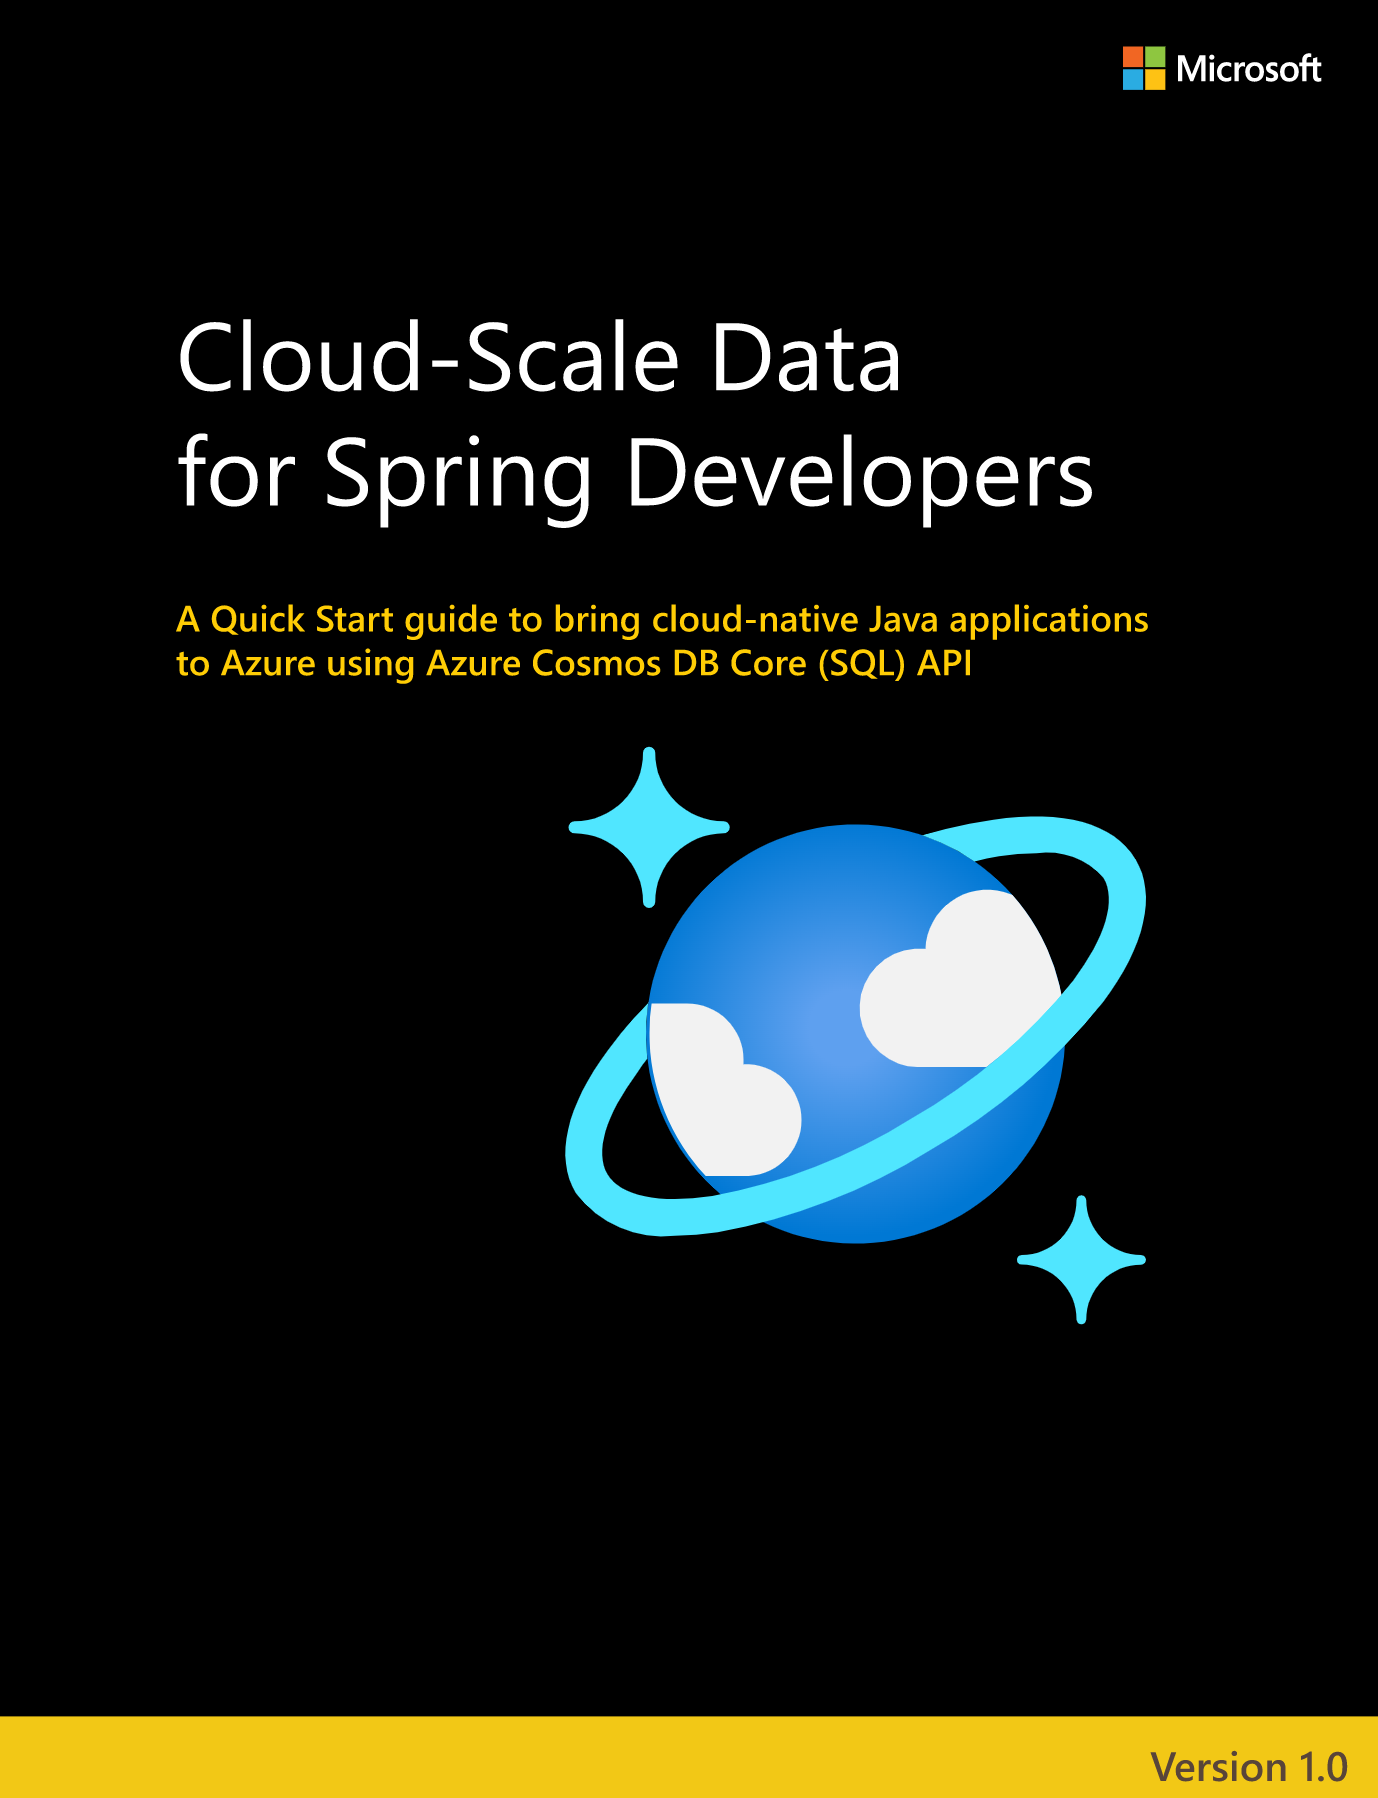 Attention Developers: The Cloud-Scale Data for Spring Developers Quick Start Guide is Finally Here!